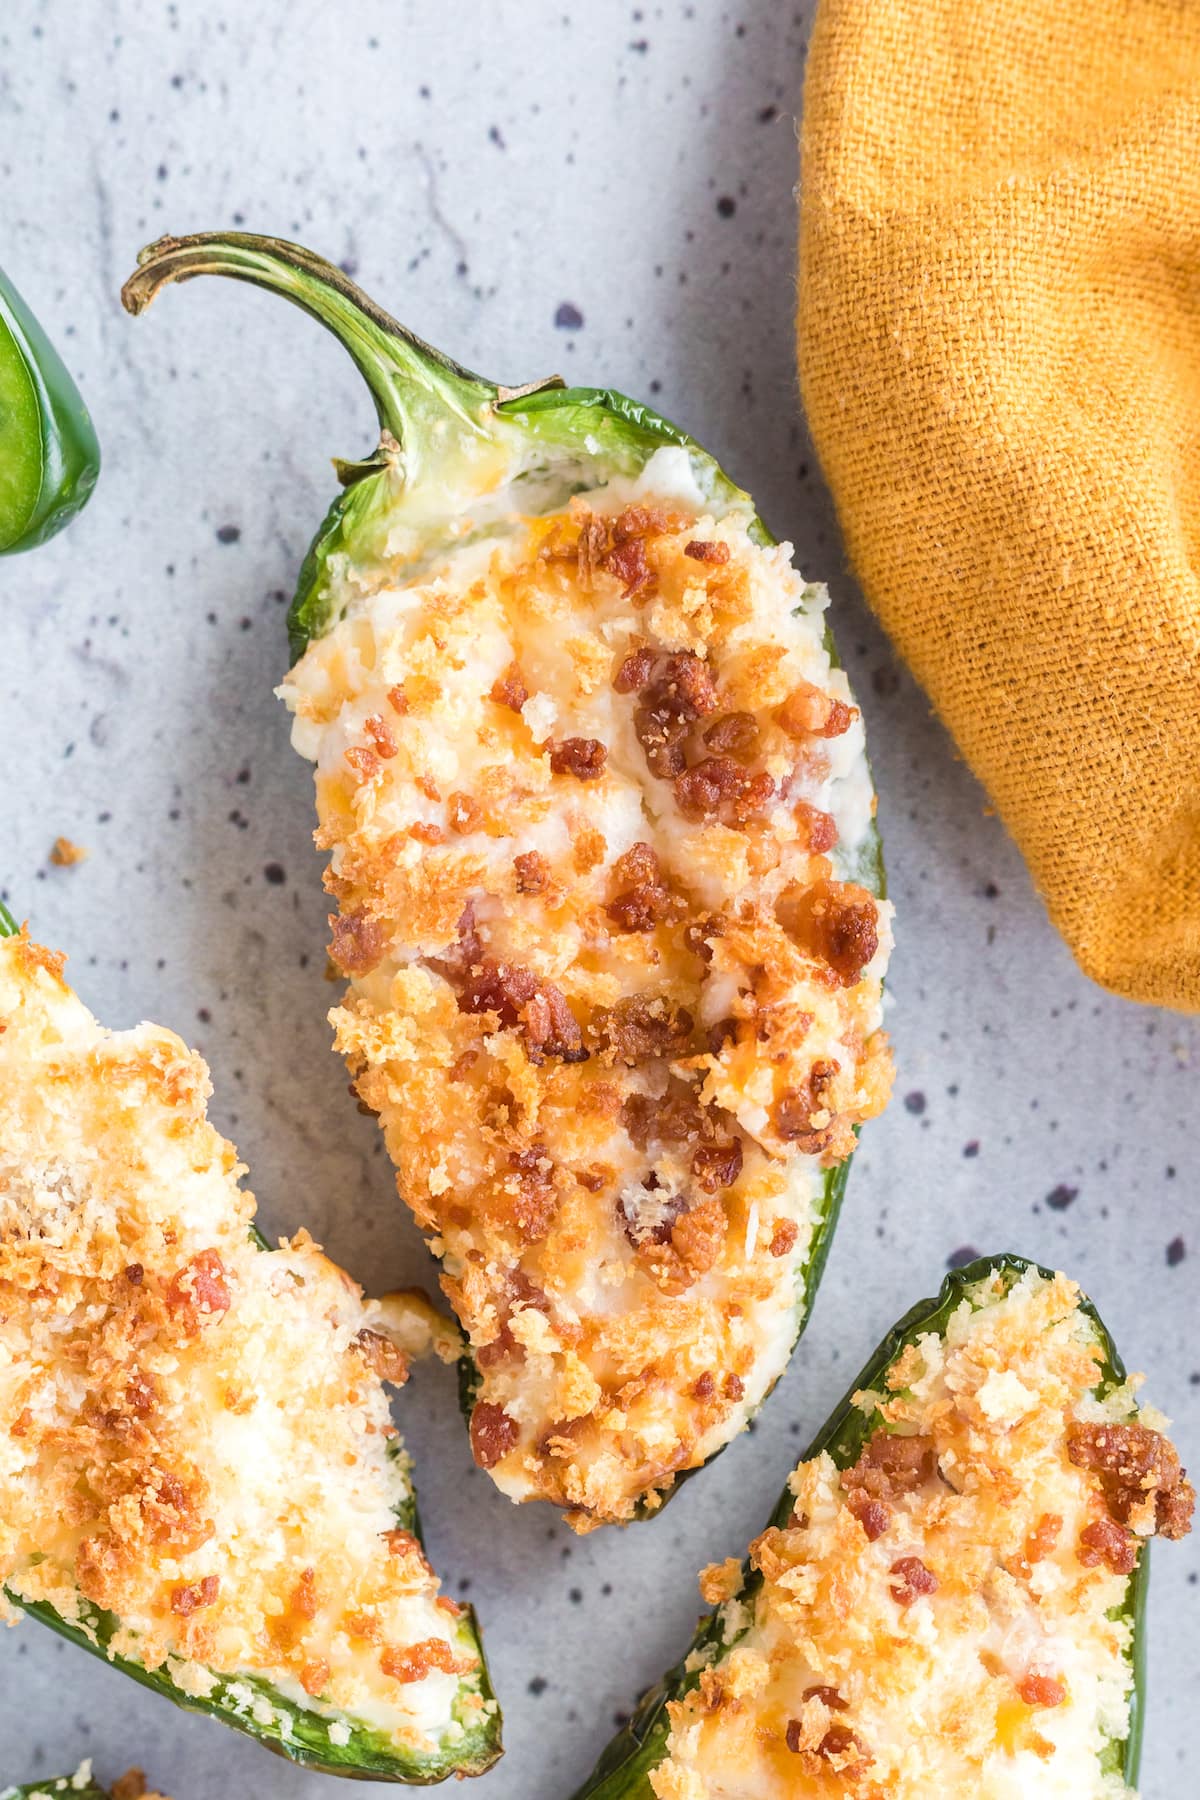 air fried jalapeño peppers sliced in half stuffed with cream cheese mixture and bread crumbs on a speckled plate